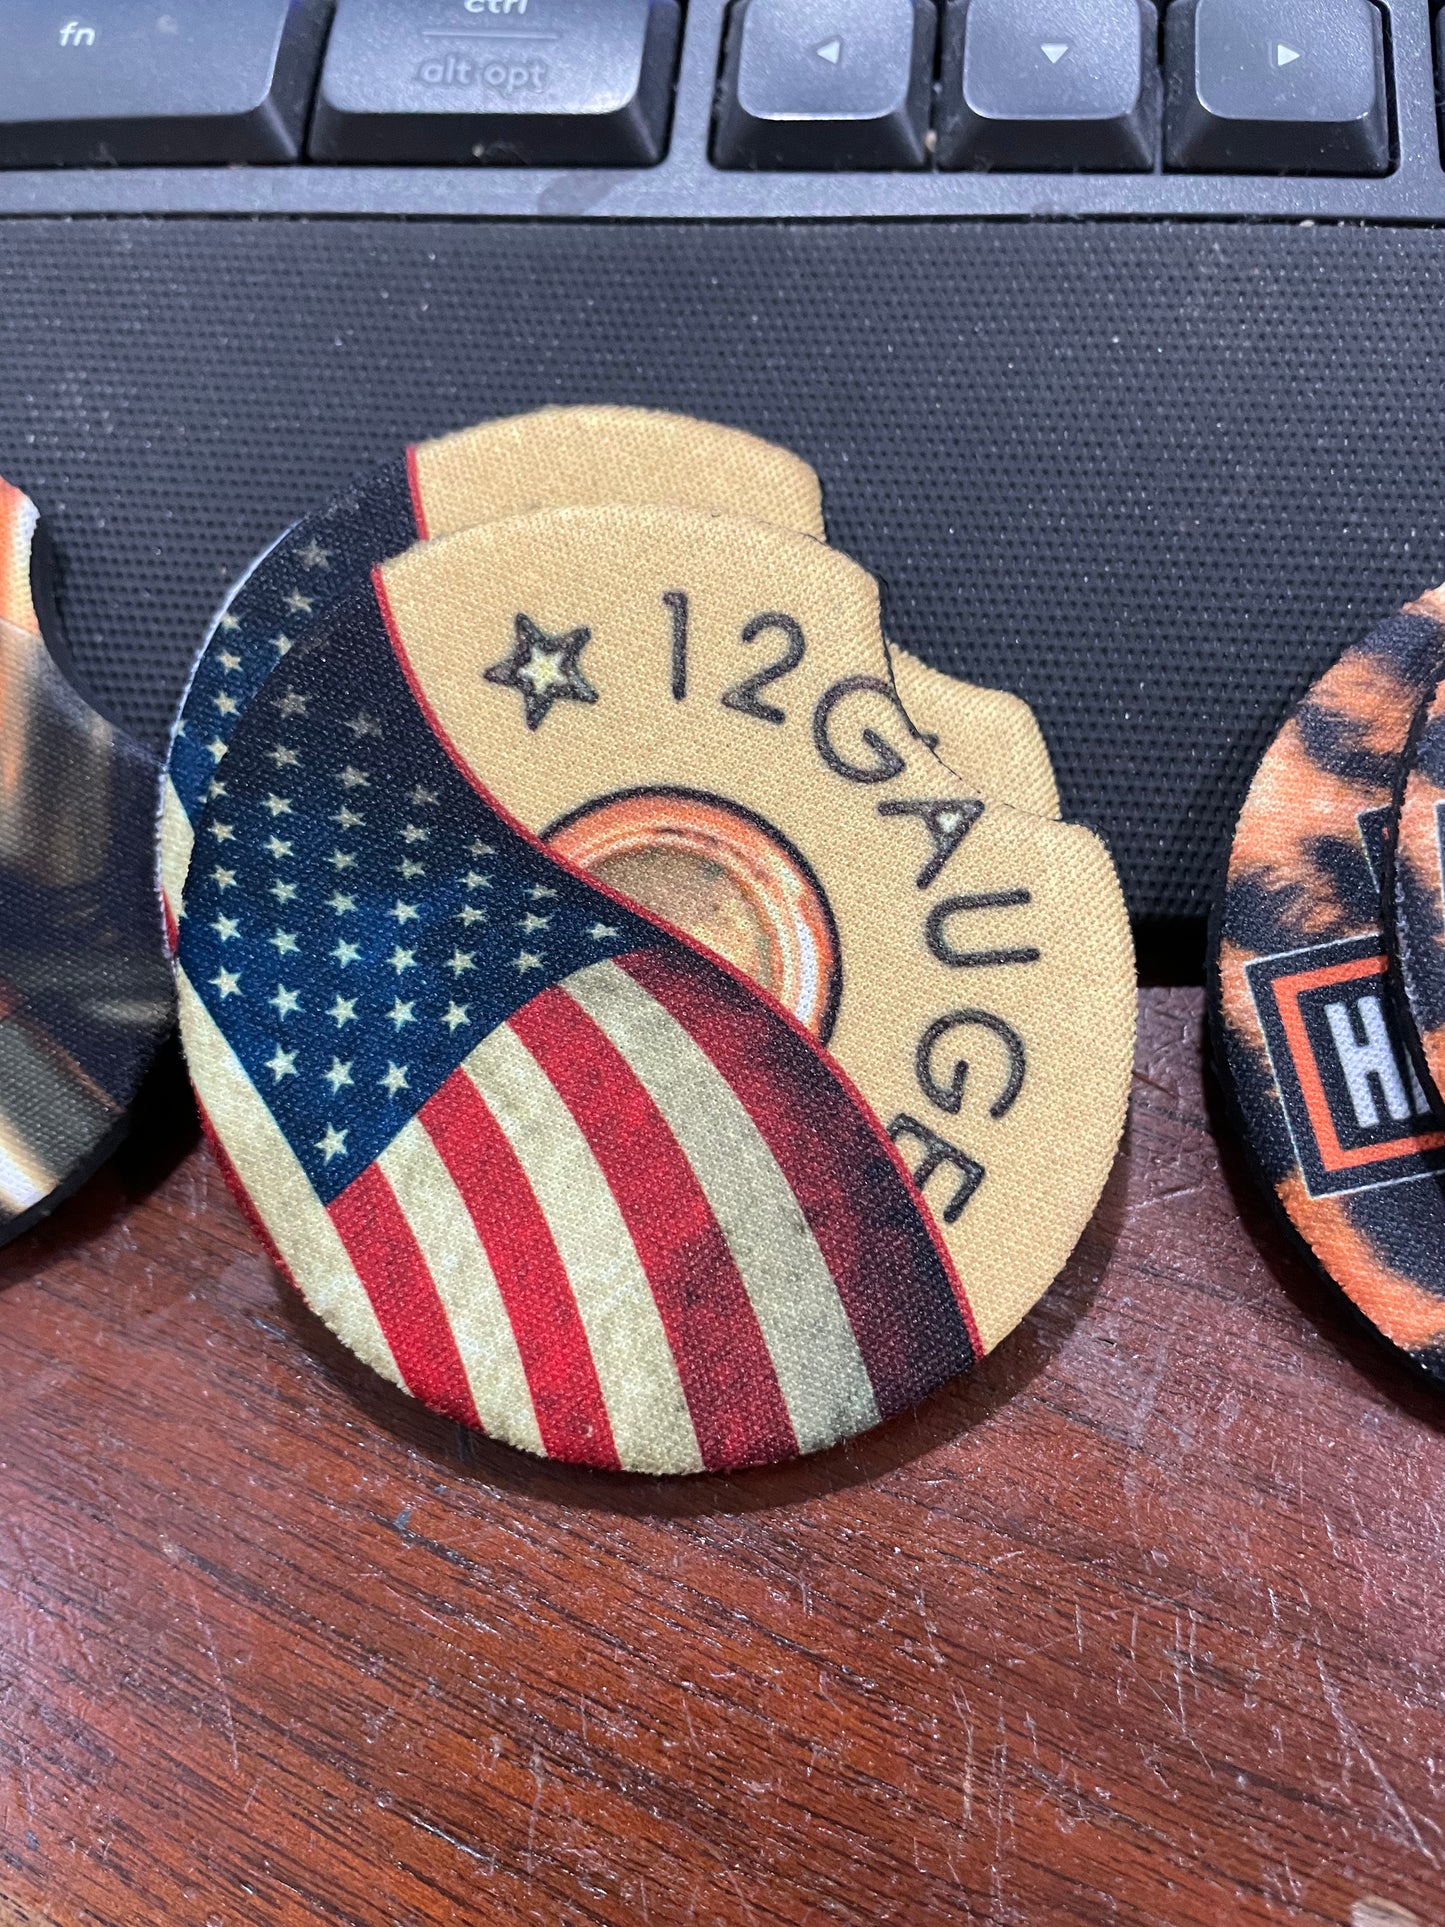 12 gauge and the American flag car coasters